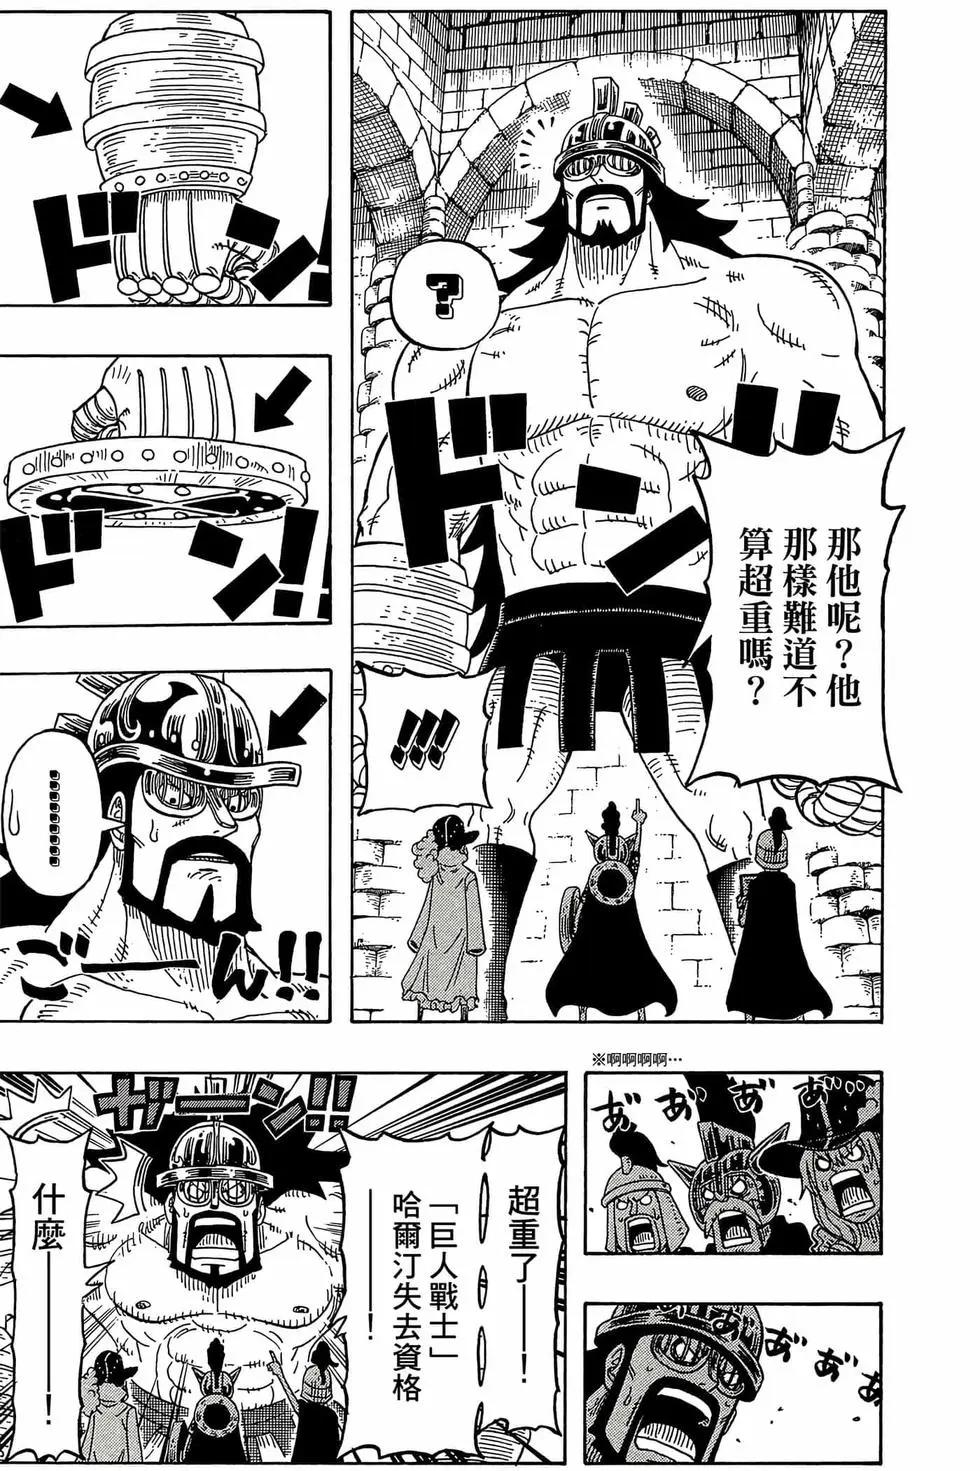 One piece party - 第02卷(1/4) - 2